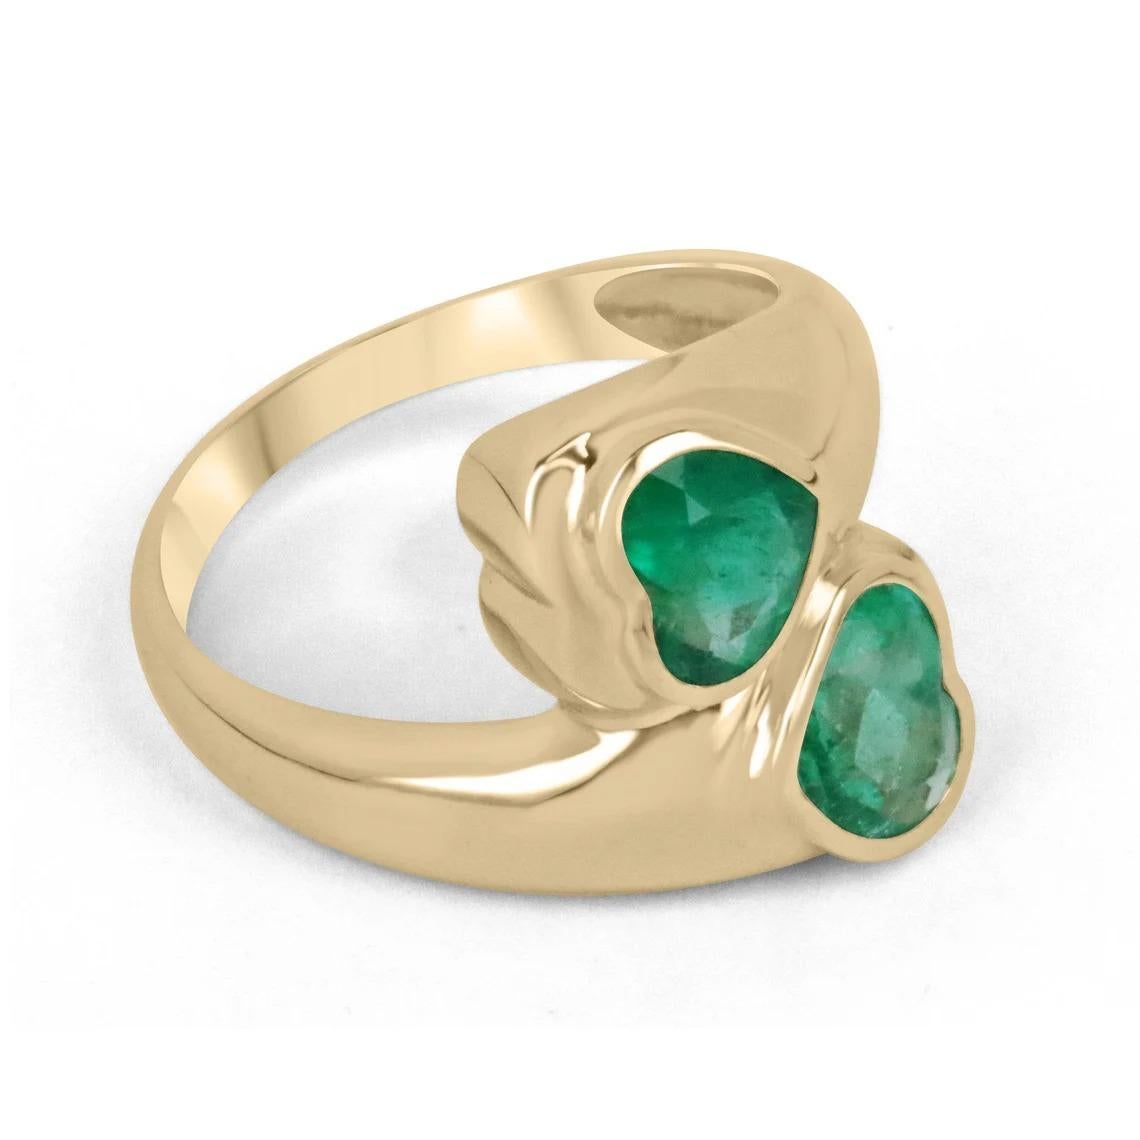 A fascinating, emerald dual bypass statement ring. This beauty features a total of 2.07-carats, of natural Colombian heart-cut emeralds with remarkable characteristics. Both gemstones display an enthralling vivid green color, transparent clarity,